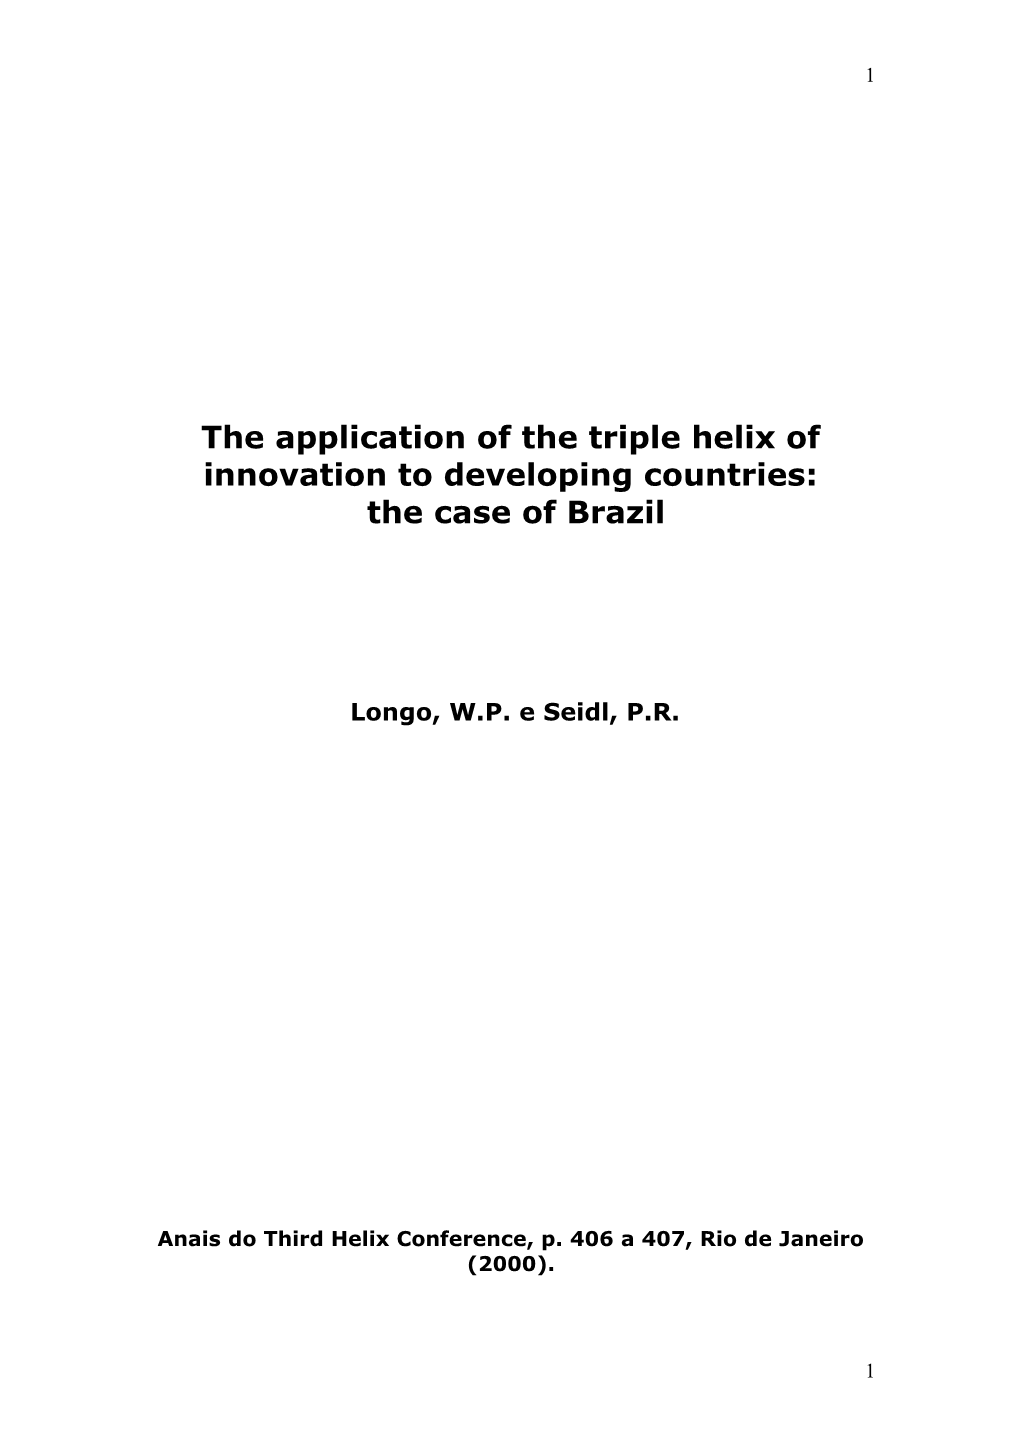 The Application of the Triple Helix of Innovation to Developing Countries